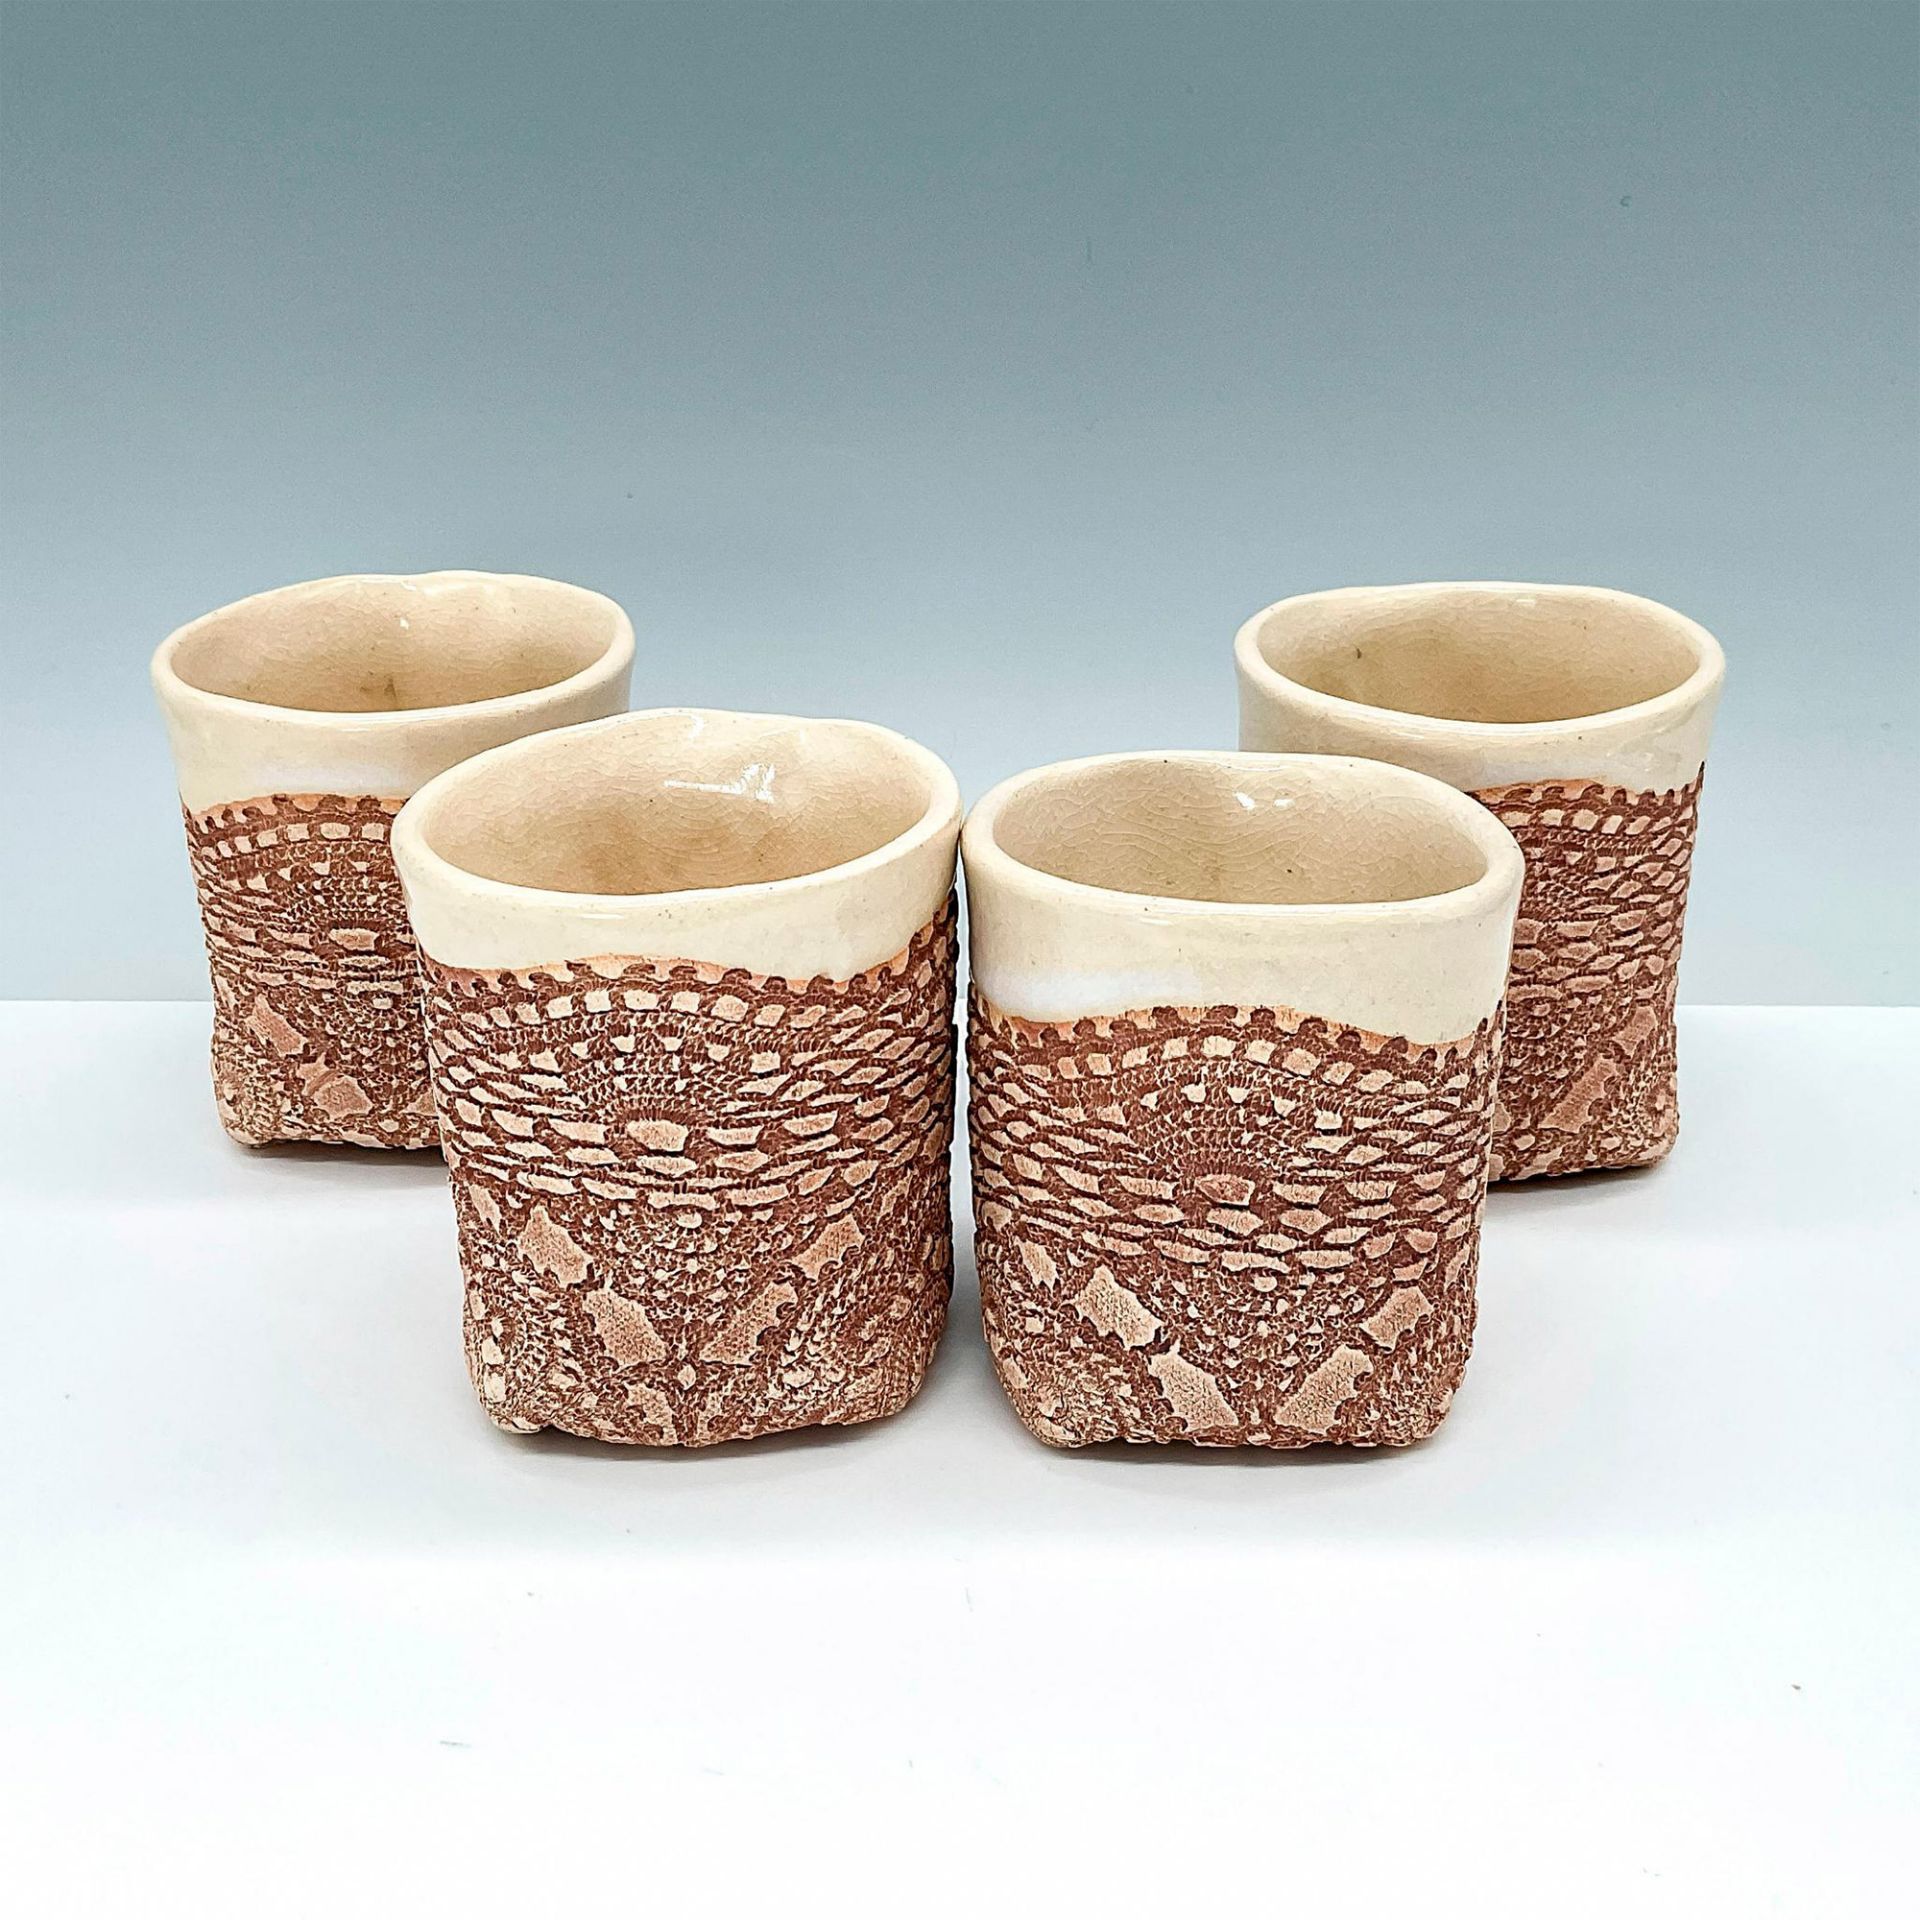 4pc Blue Heron Lace Impressed Art Pottery Cups by Jayn Avery - Image 2 of 3